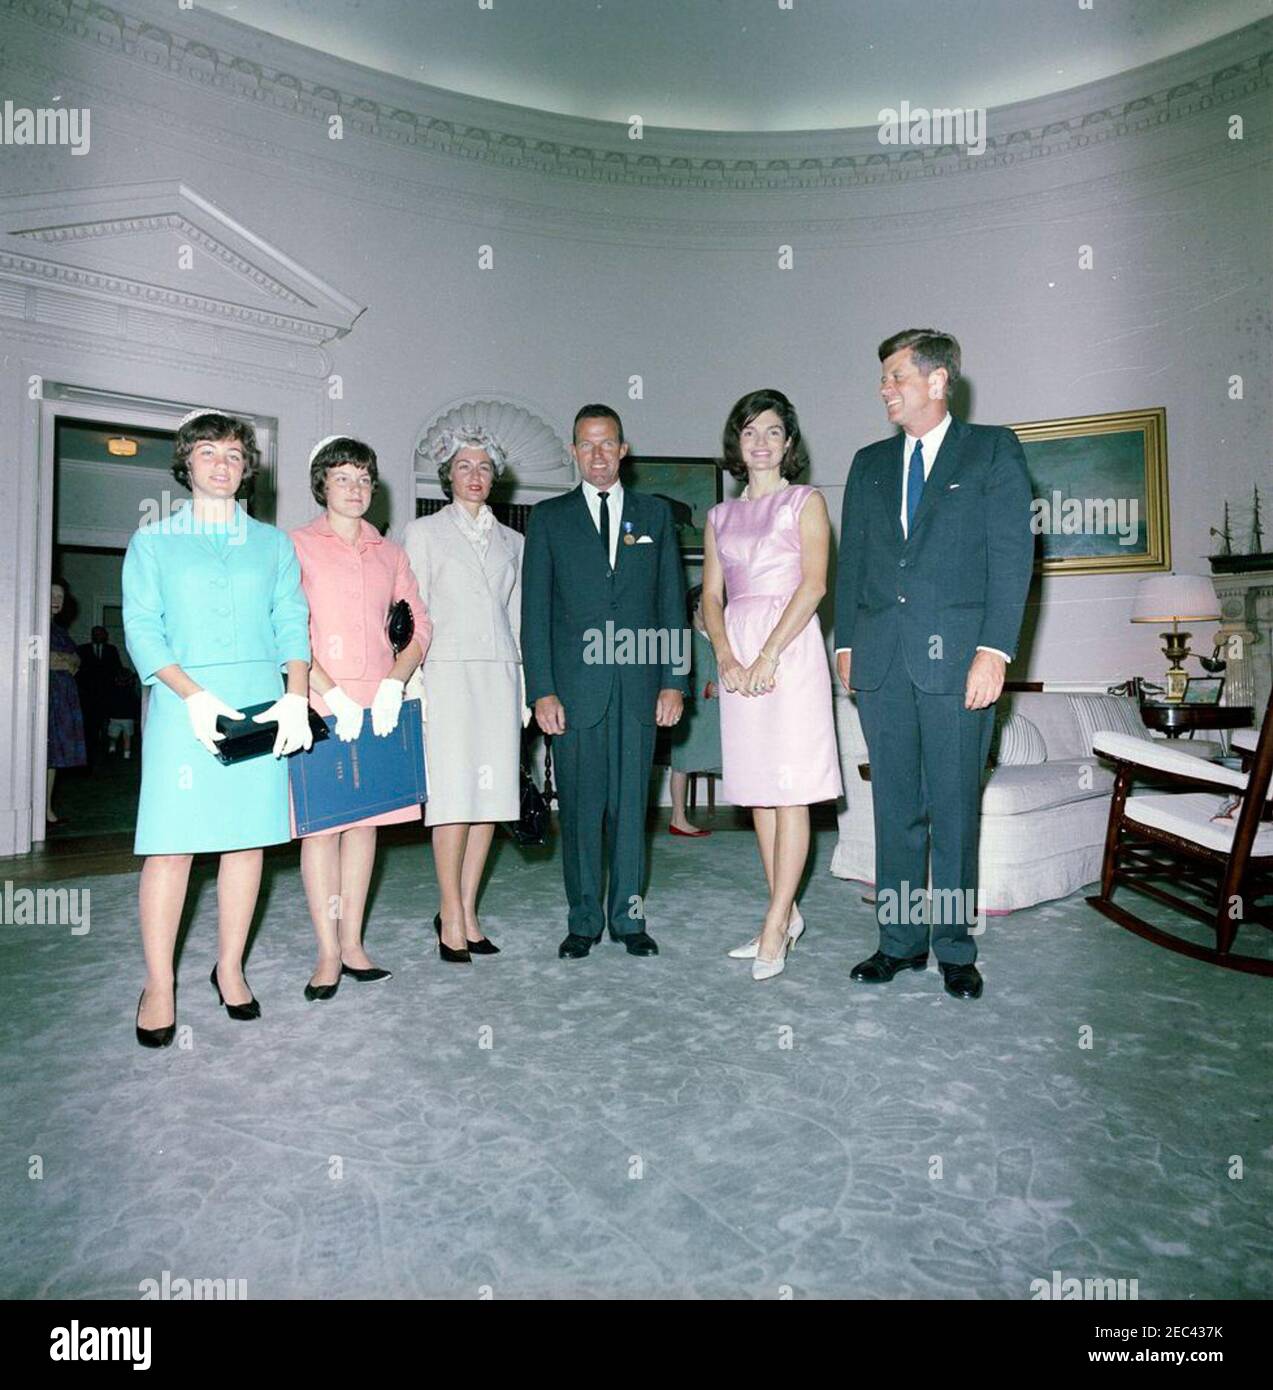 Presentation of the National Aeronautics and Space Administration (NASA) Distinguished Service Medal (DSM) to Astronaut Major L. Gordon Cooper, 12:15PM. President John F. Kennedy and First Lady Jacqueline Kennedy visit with astronaut Major L. Gordon Cooper and his family, following Major Cooperu2019s National Aeronautics and Space Administration (NASA) Distinguished Service Medal (DSM) presentation ceremony. Left to right: Major Cooperu2019s daughters, Camala and Janita; his wife, Trudy; Major Cooper; Mrs. Kennedy; President Kennedy. Oval Office, White House, Washington, D.C. Stock Photo